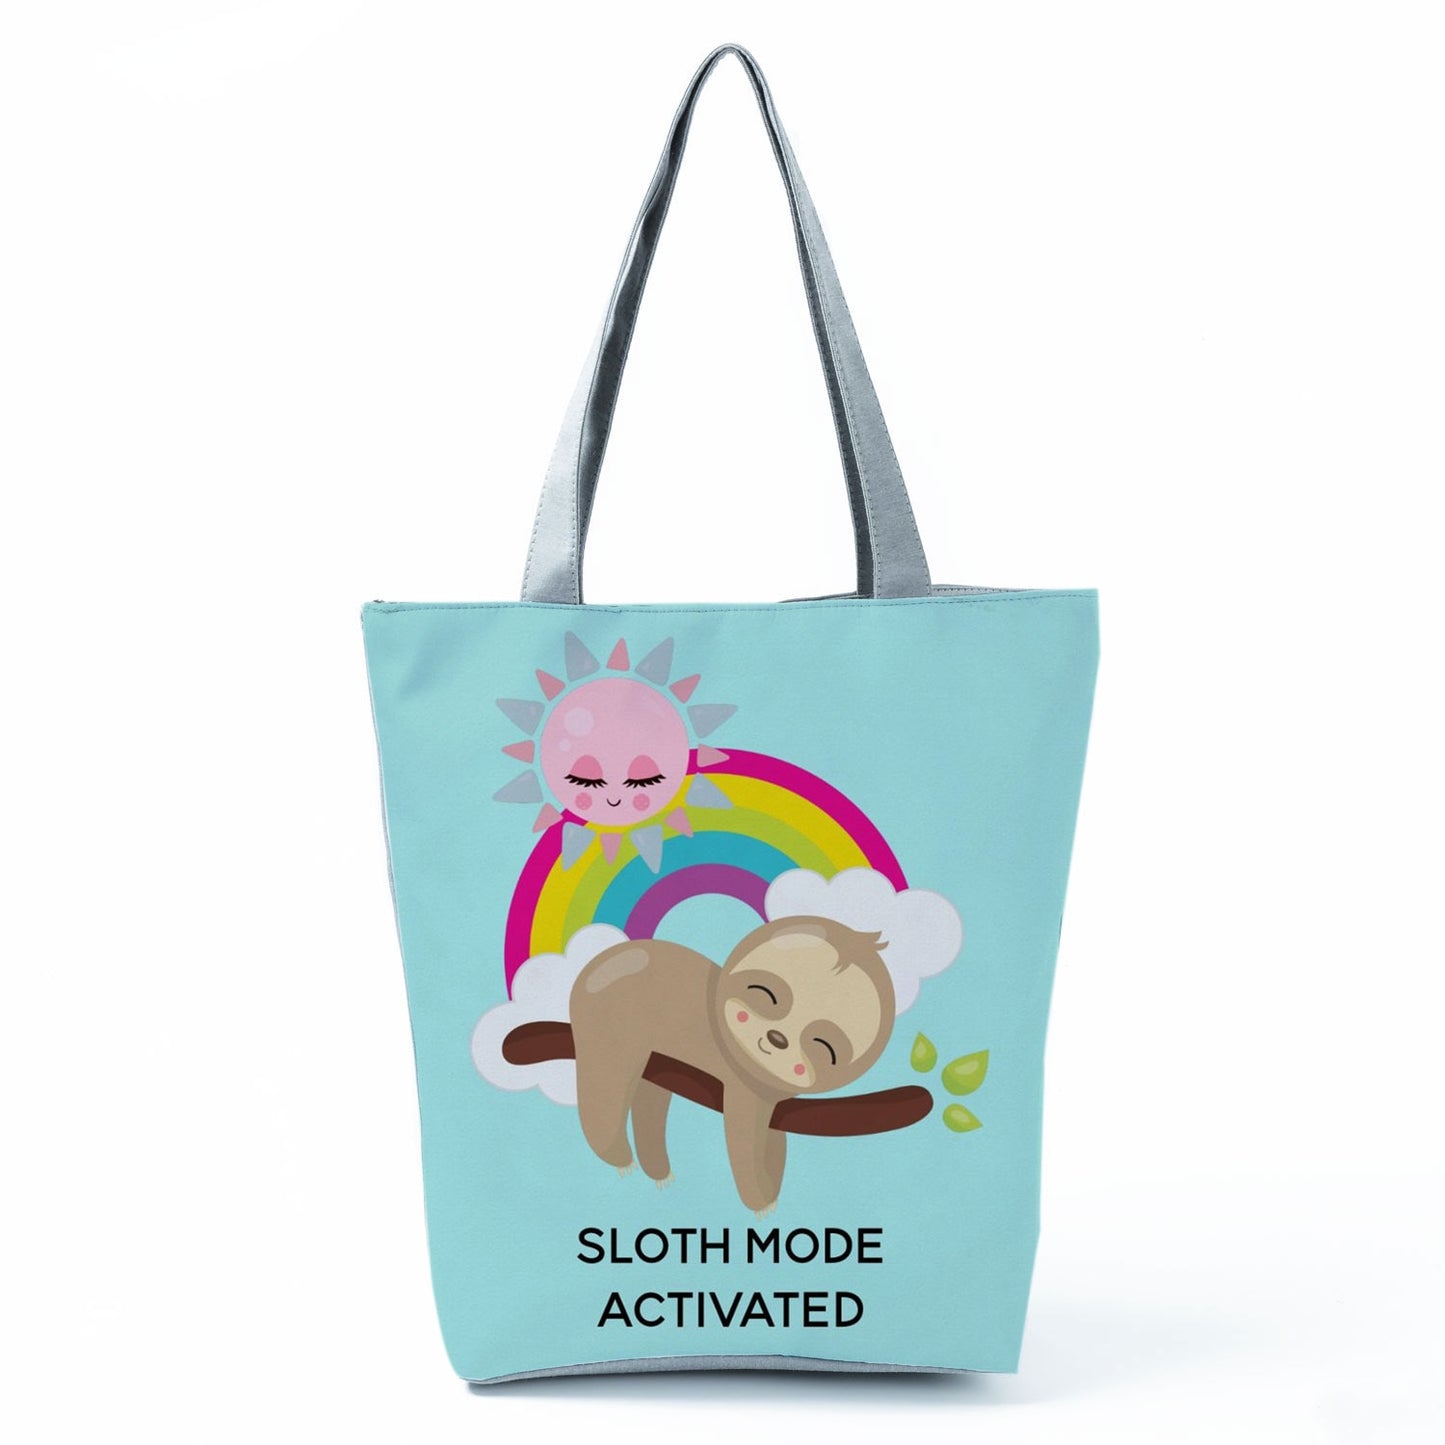 Sloth Mode Activated Tote Bag